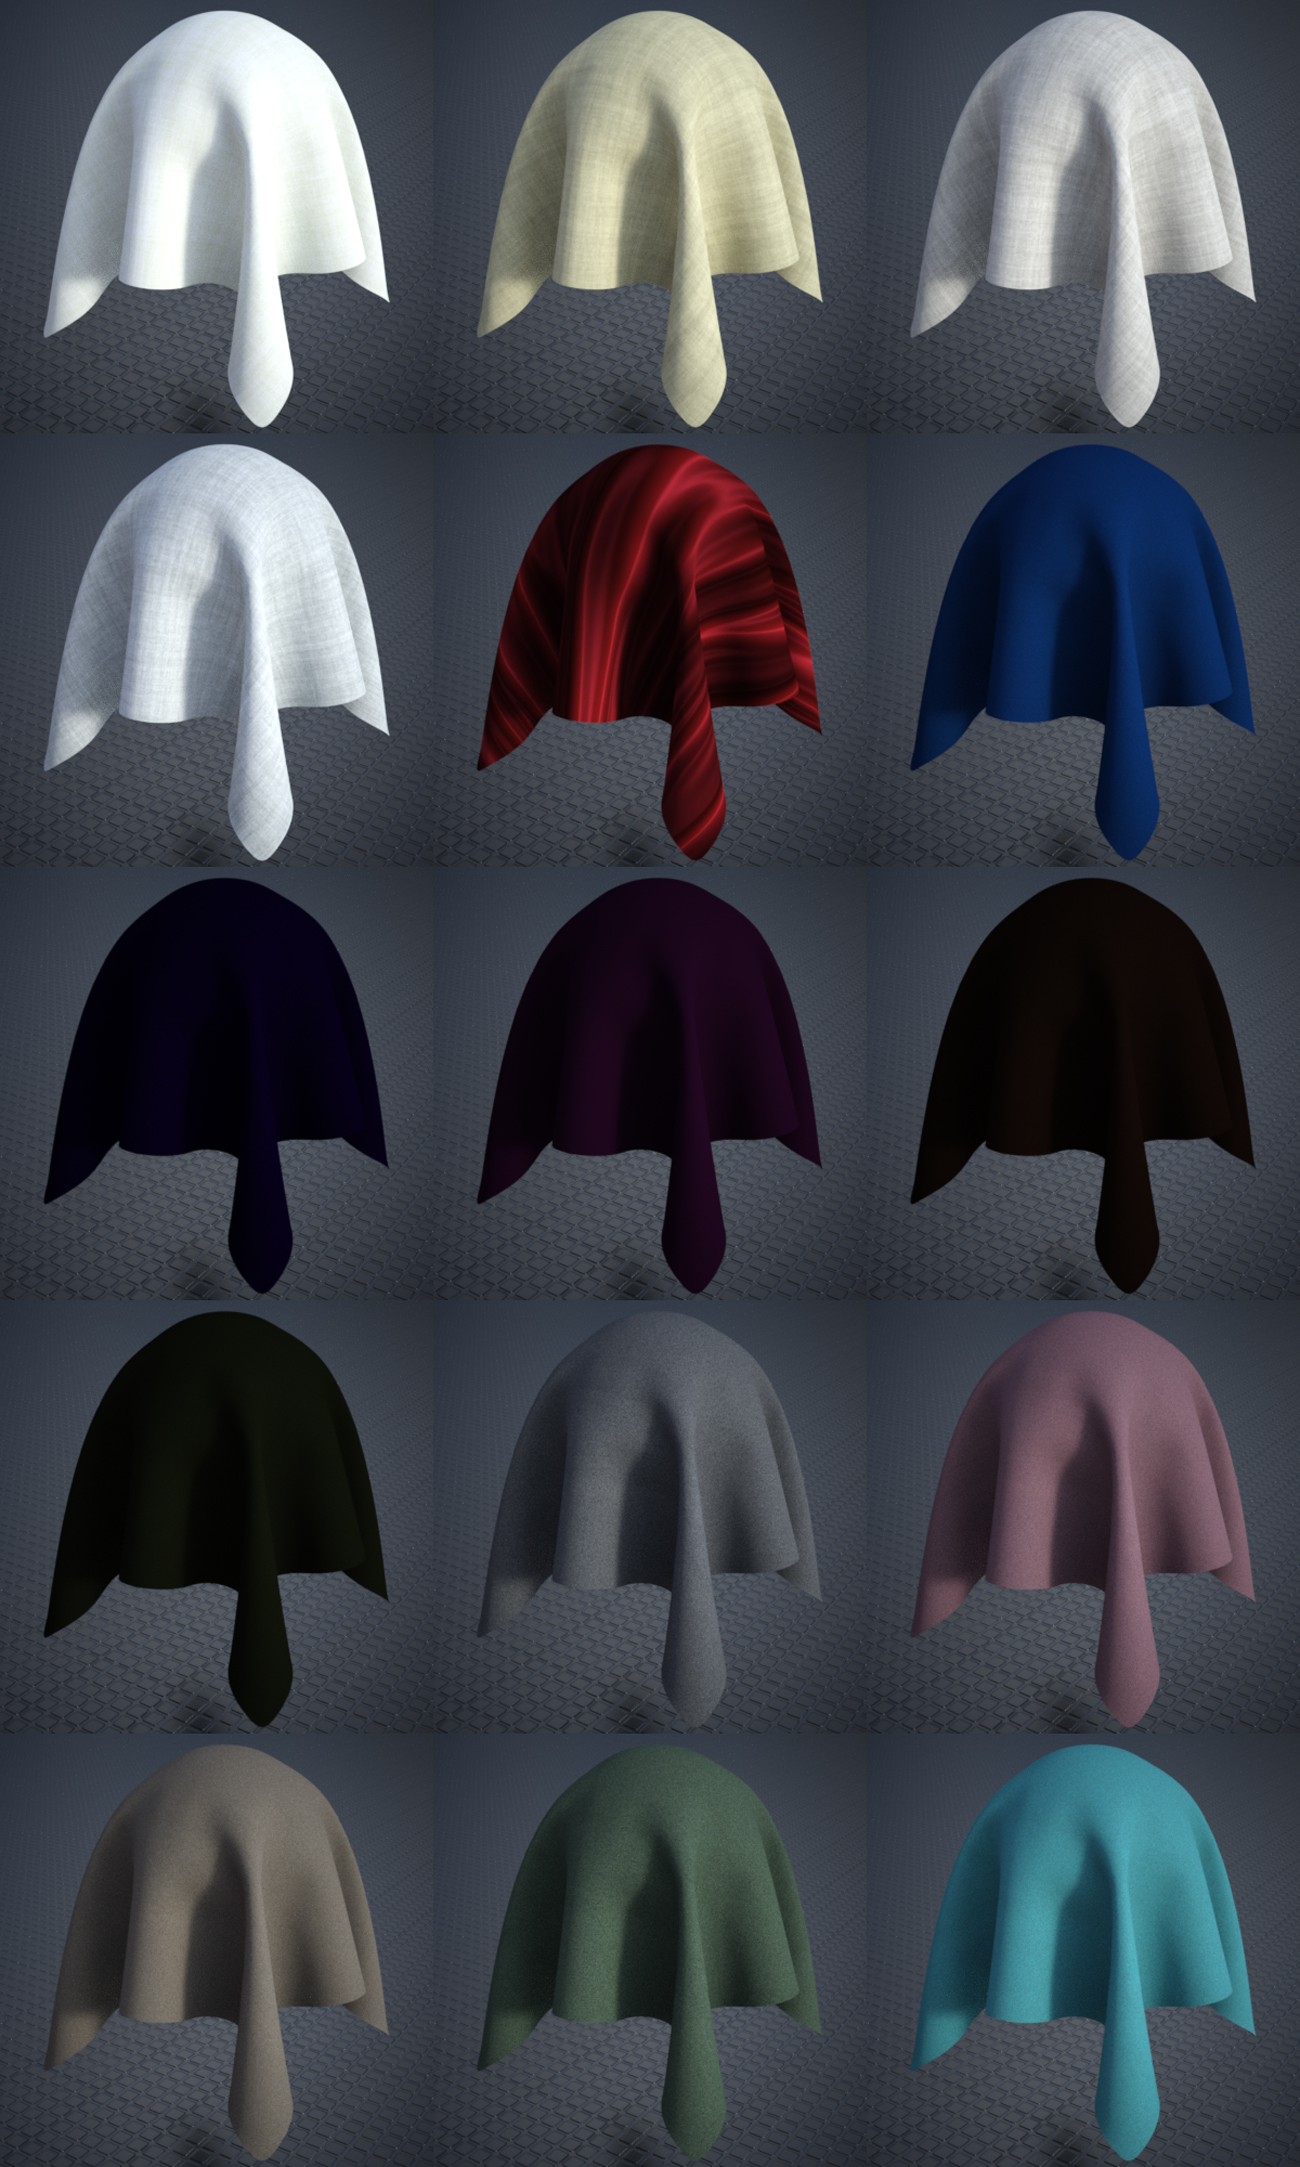 Everyday Cloth Iray Shaders by: JGreenlees, 3D Models by Daz 3D